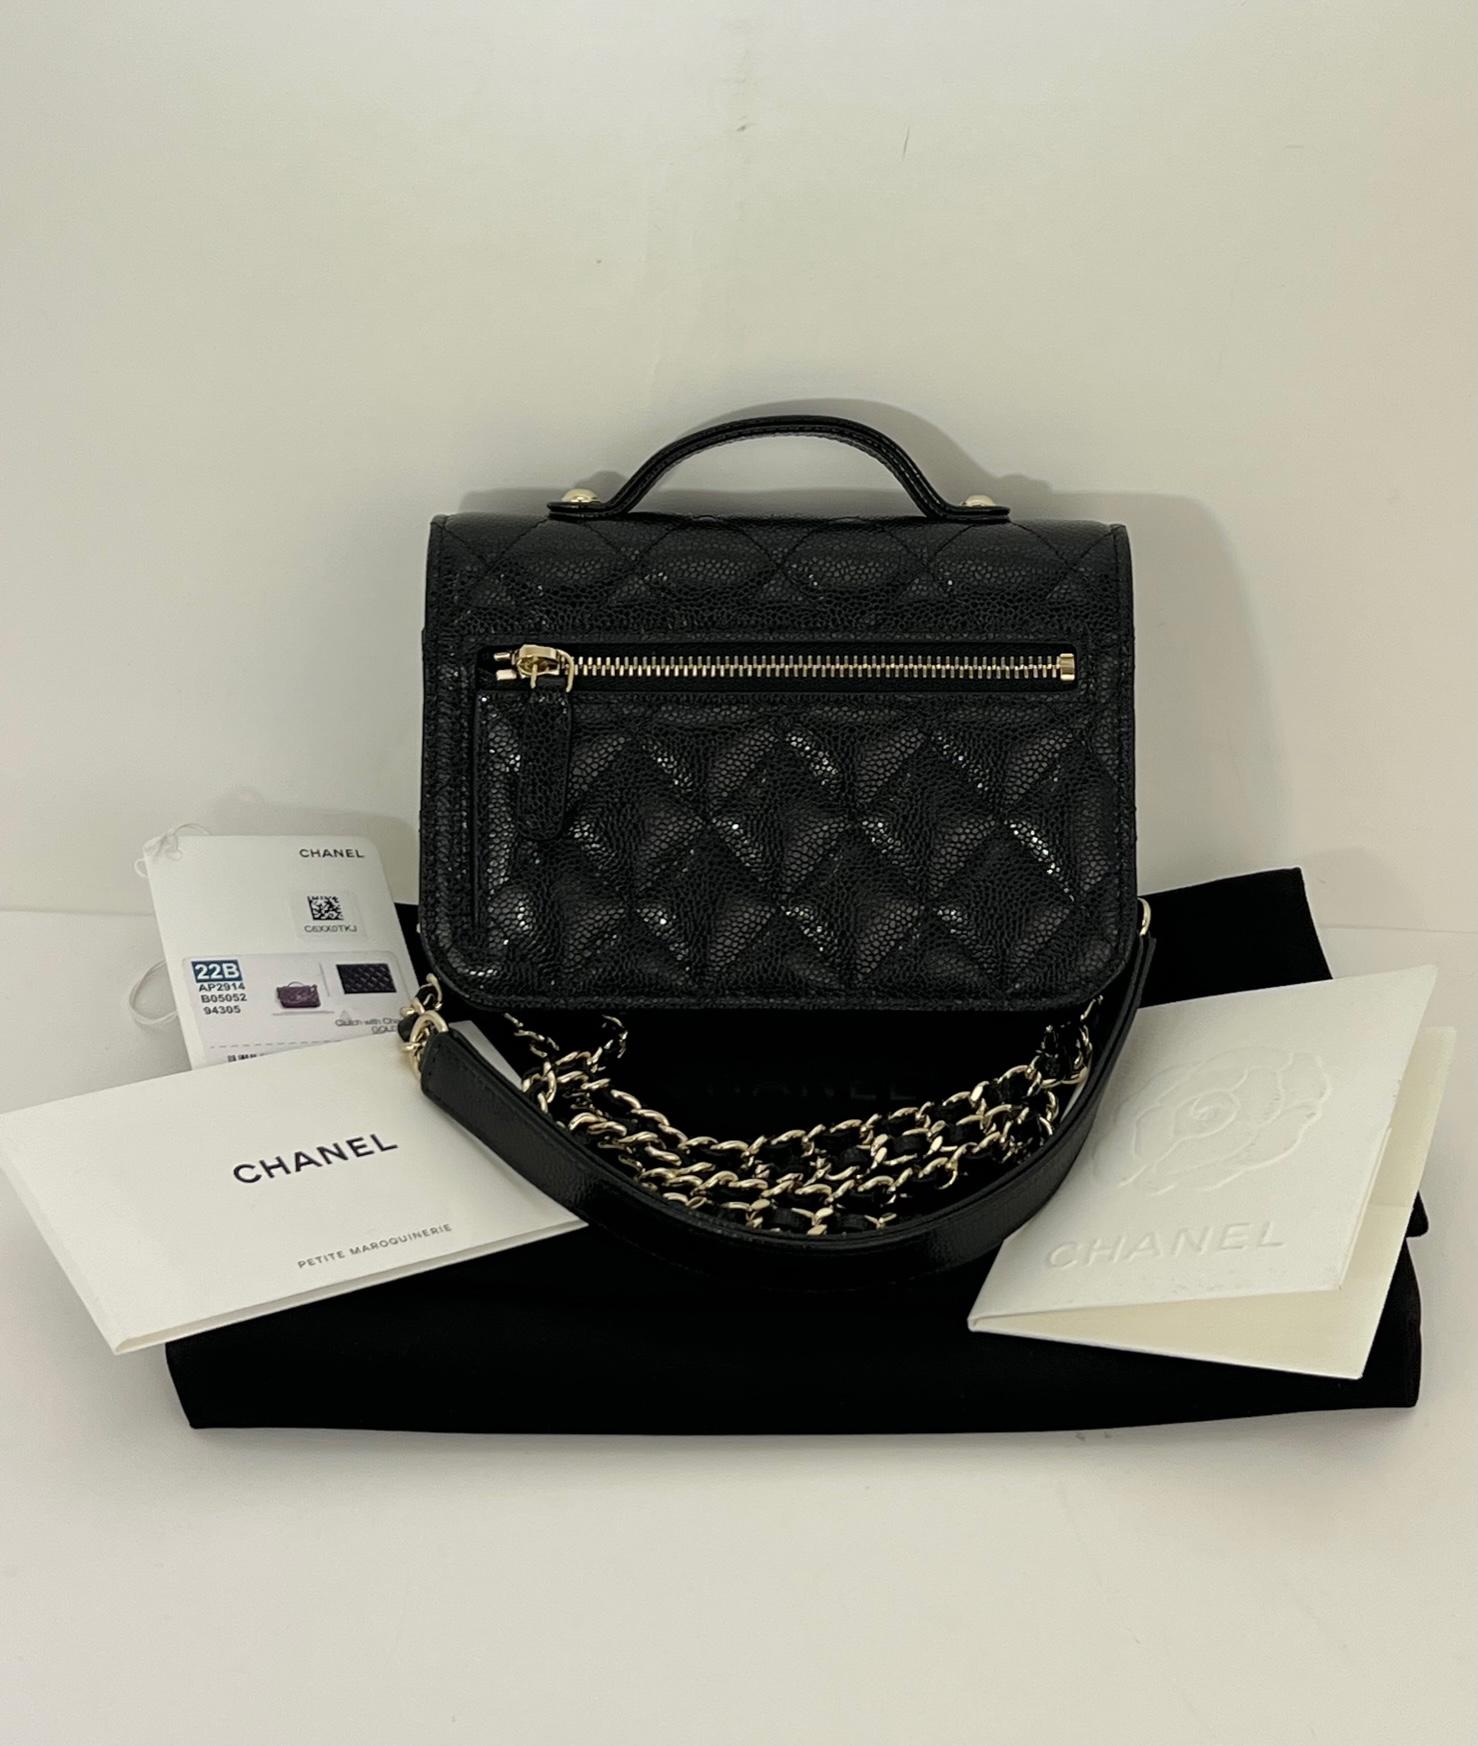 Pre-Owned  100% Authentic
Chanel Quilted Caviar Business Affinity
Clutch Shoulder Mini Bag 
RATING: A...excellent, near mint, 
only minimal signs of wear
MATERIAL: quilted lambskin
STRAP: leather entwined with chain 
DROP: 23.5''
HANDLE:  single